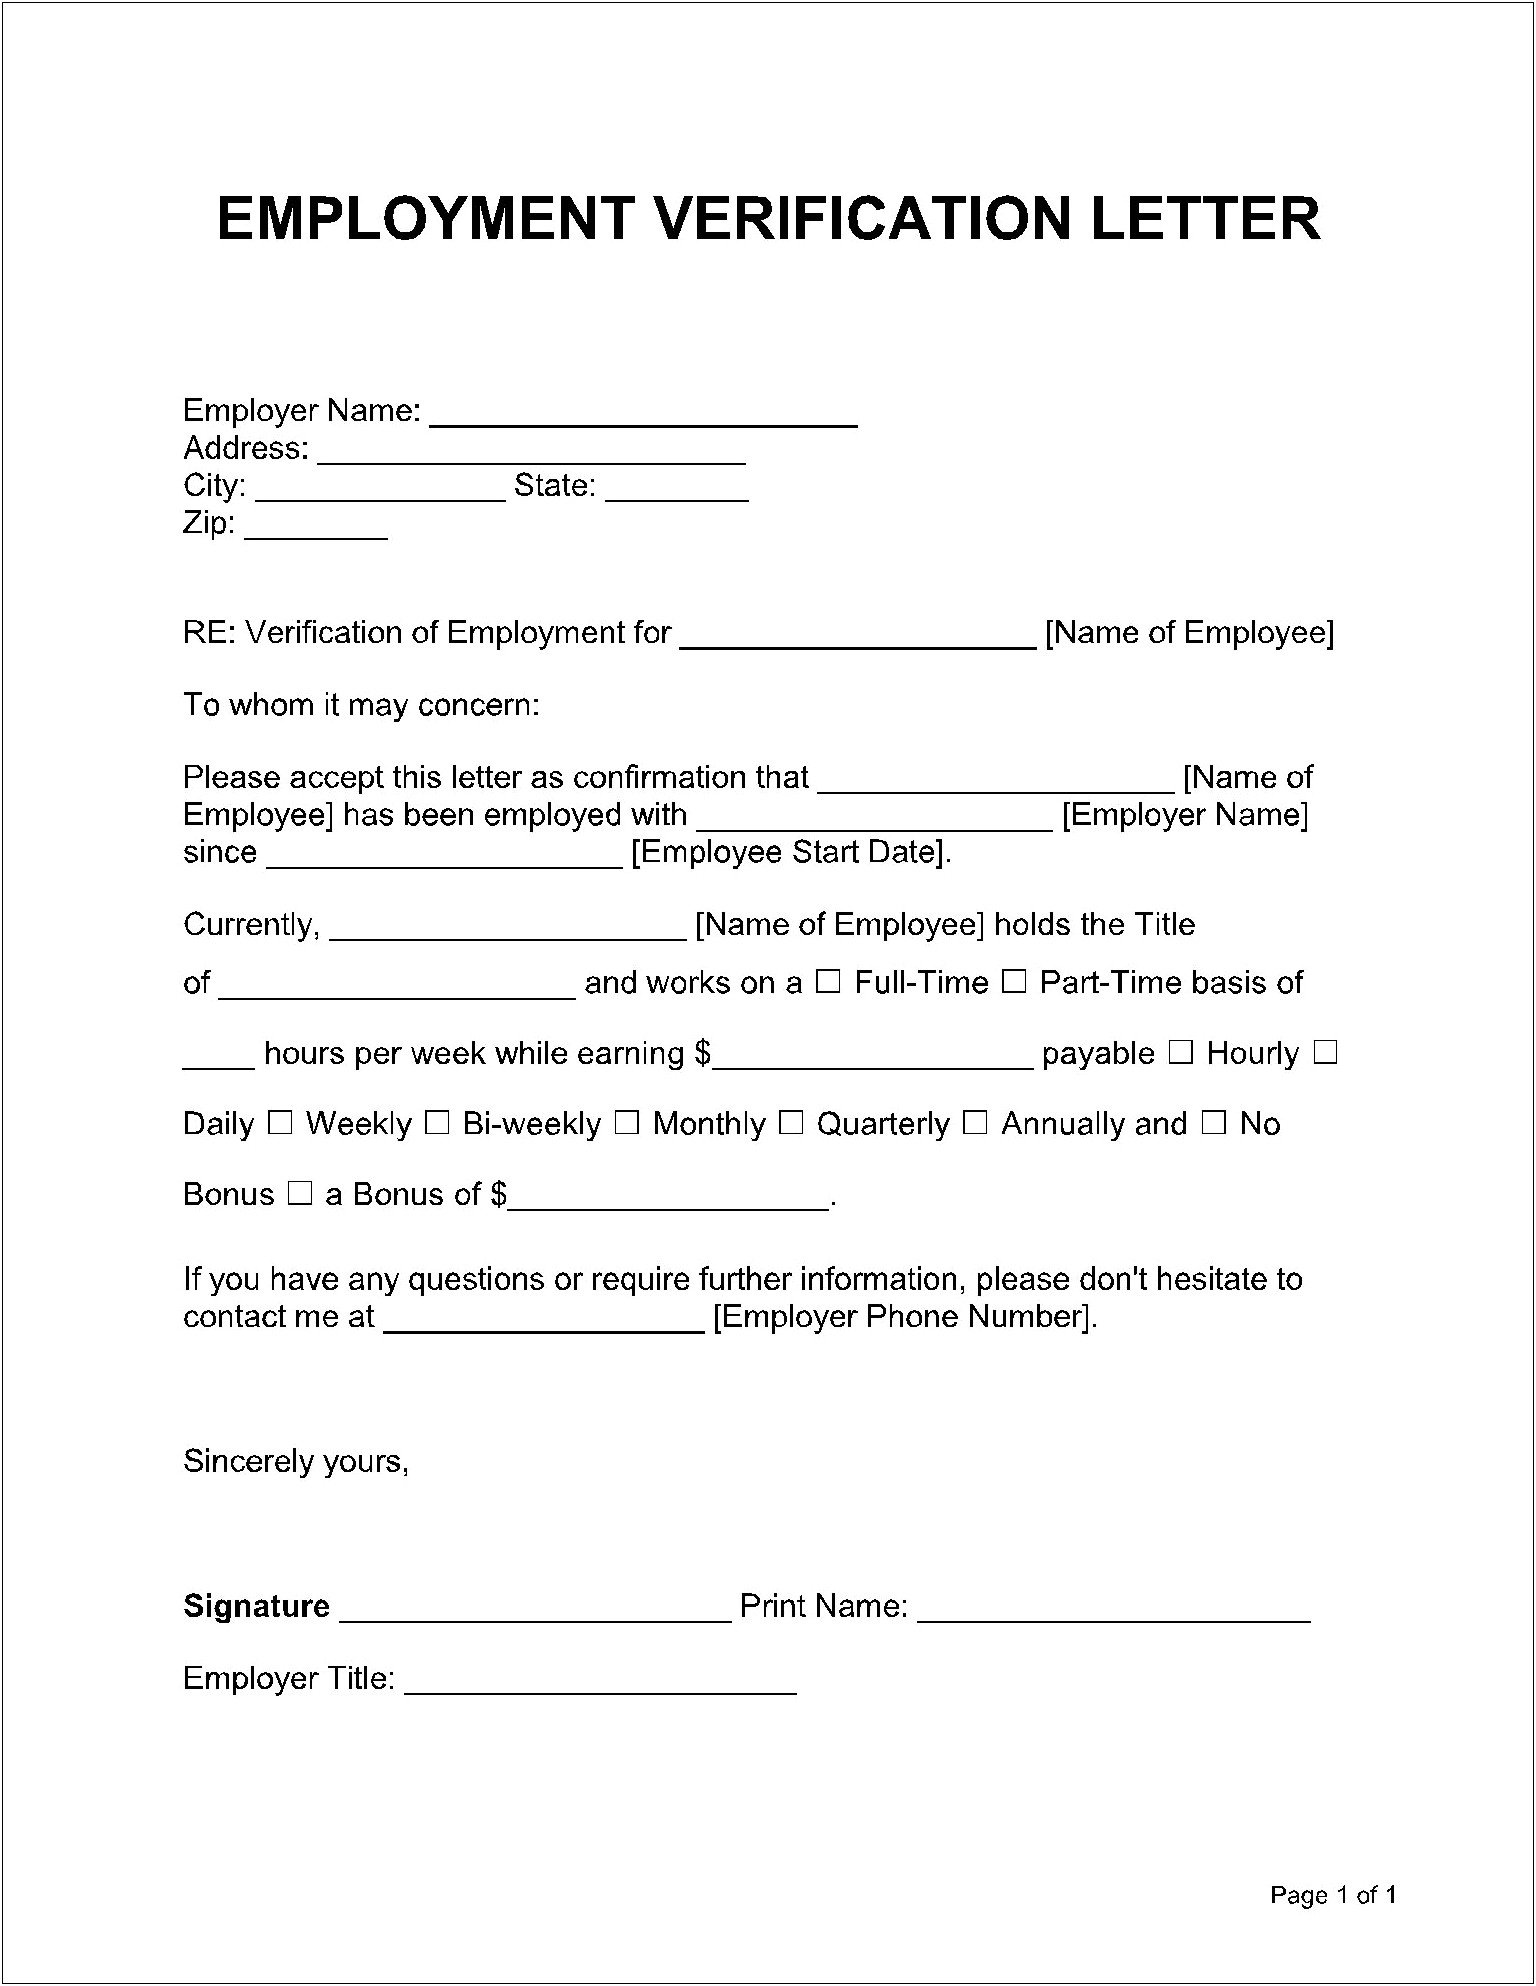 Employment Verification Letter Template For Immigration